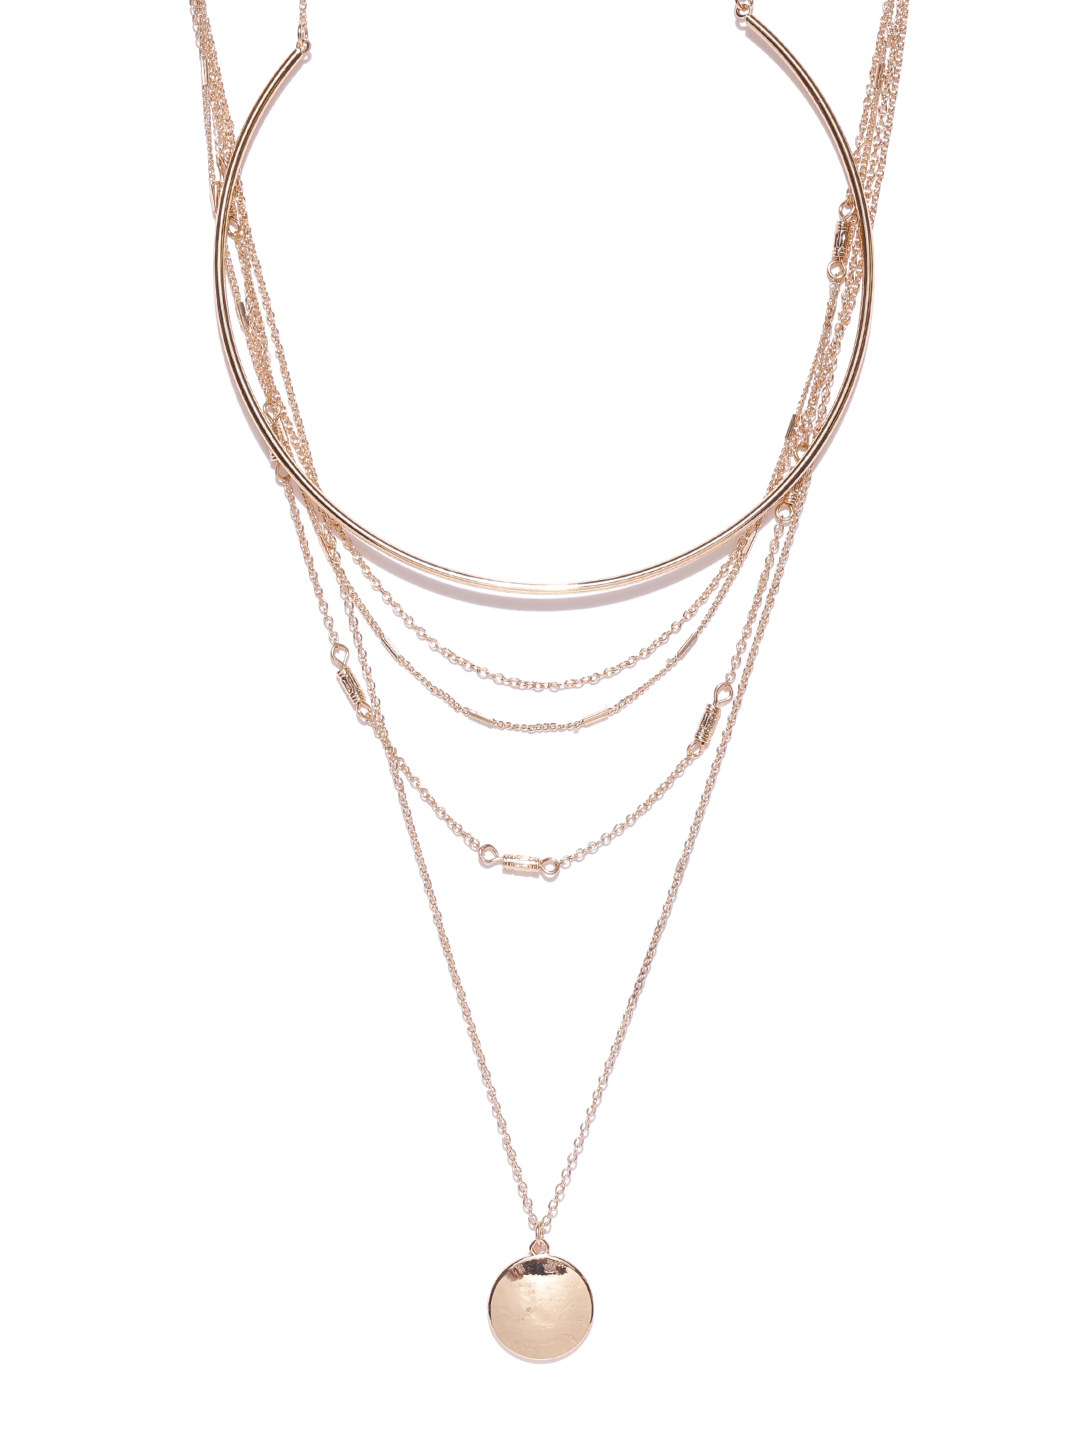 FOREVER 21 Set of 2 Gold-Toned Necklaces